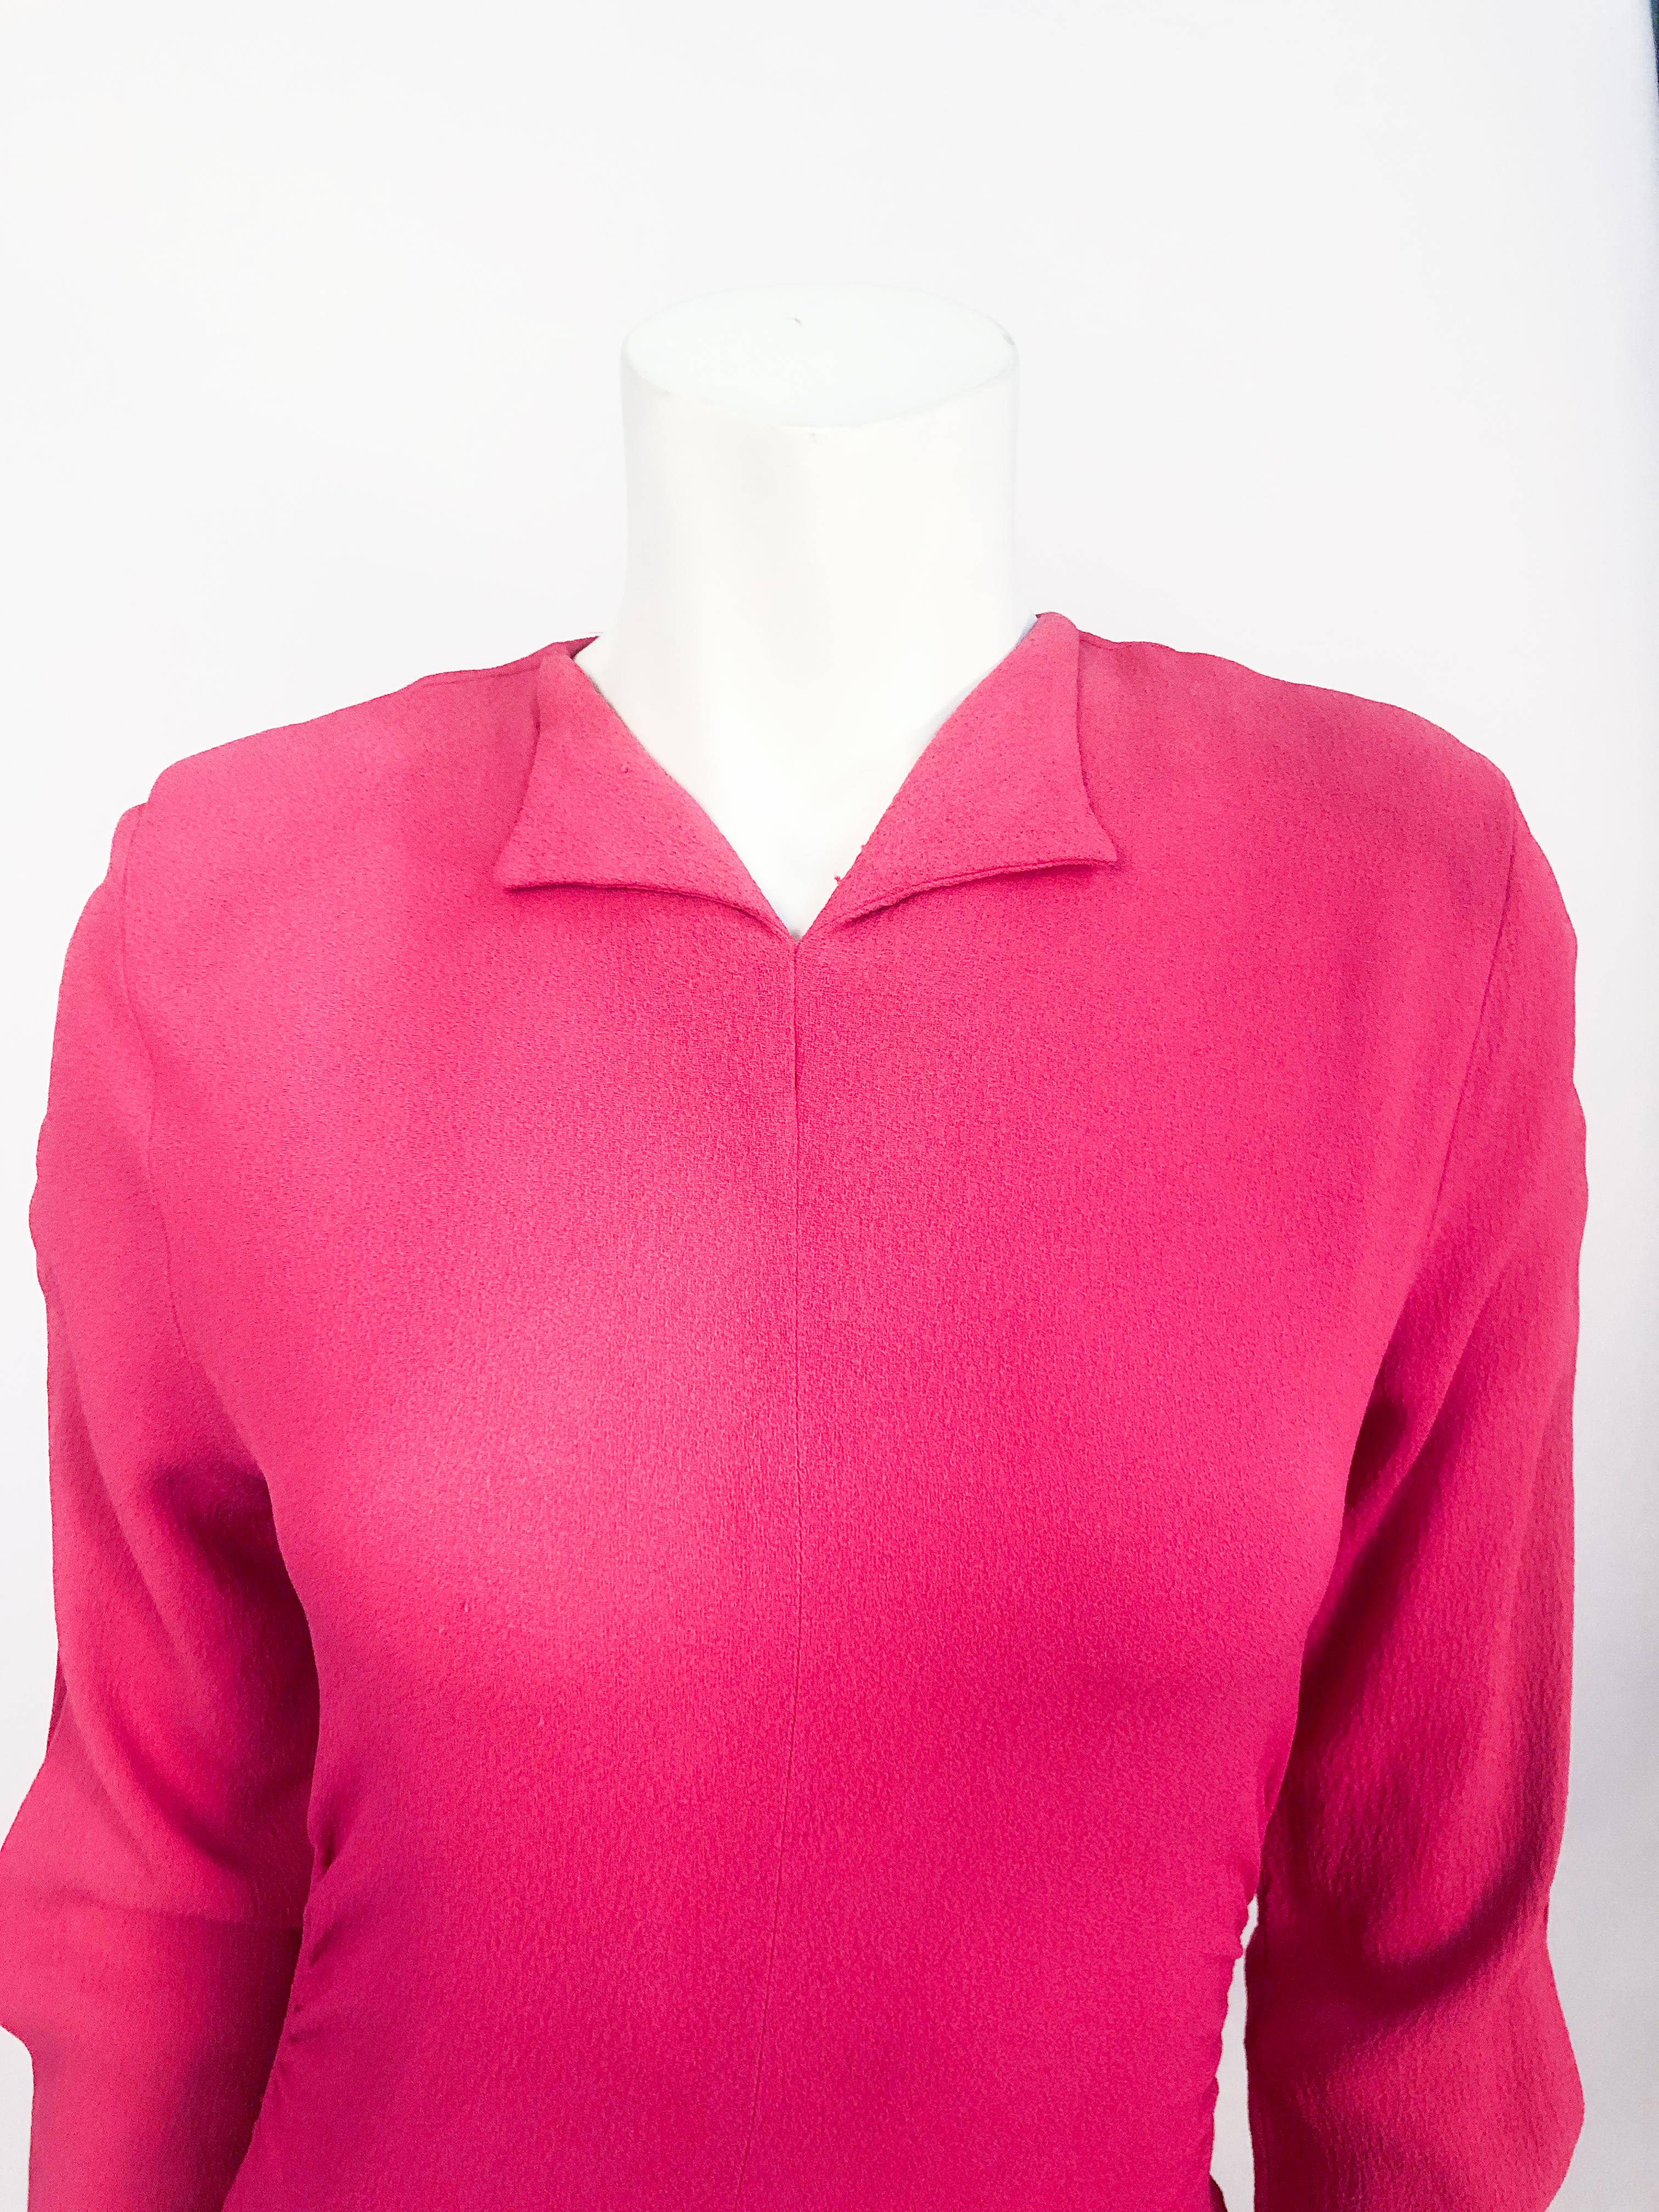 1940s Hot Pink Dress with Flounces and Draped Panels  im Zustand „Gut“ in San Francisco, CA